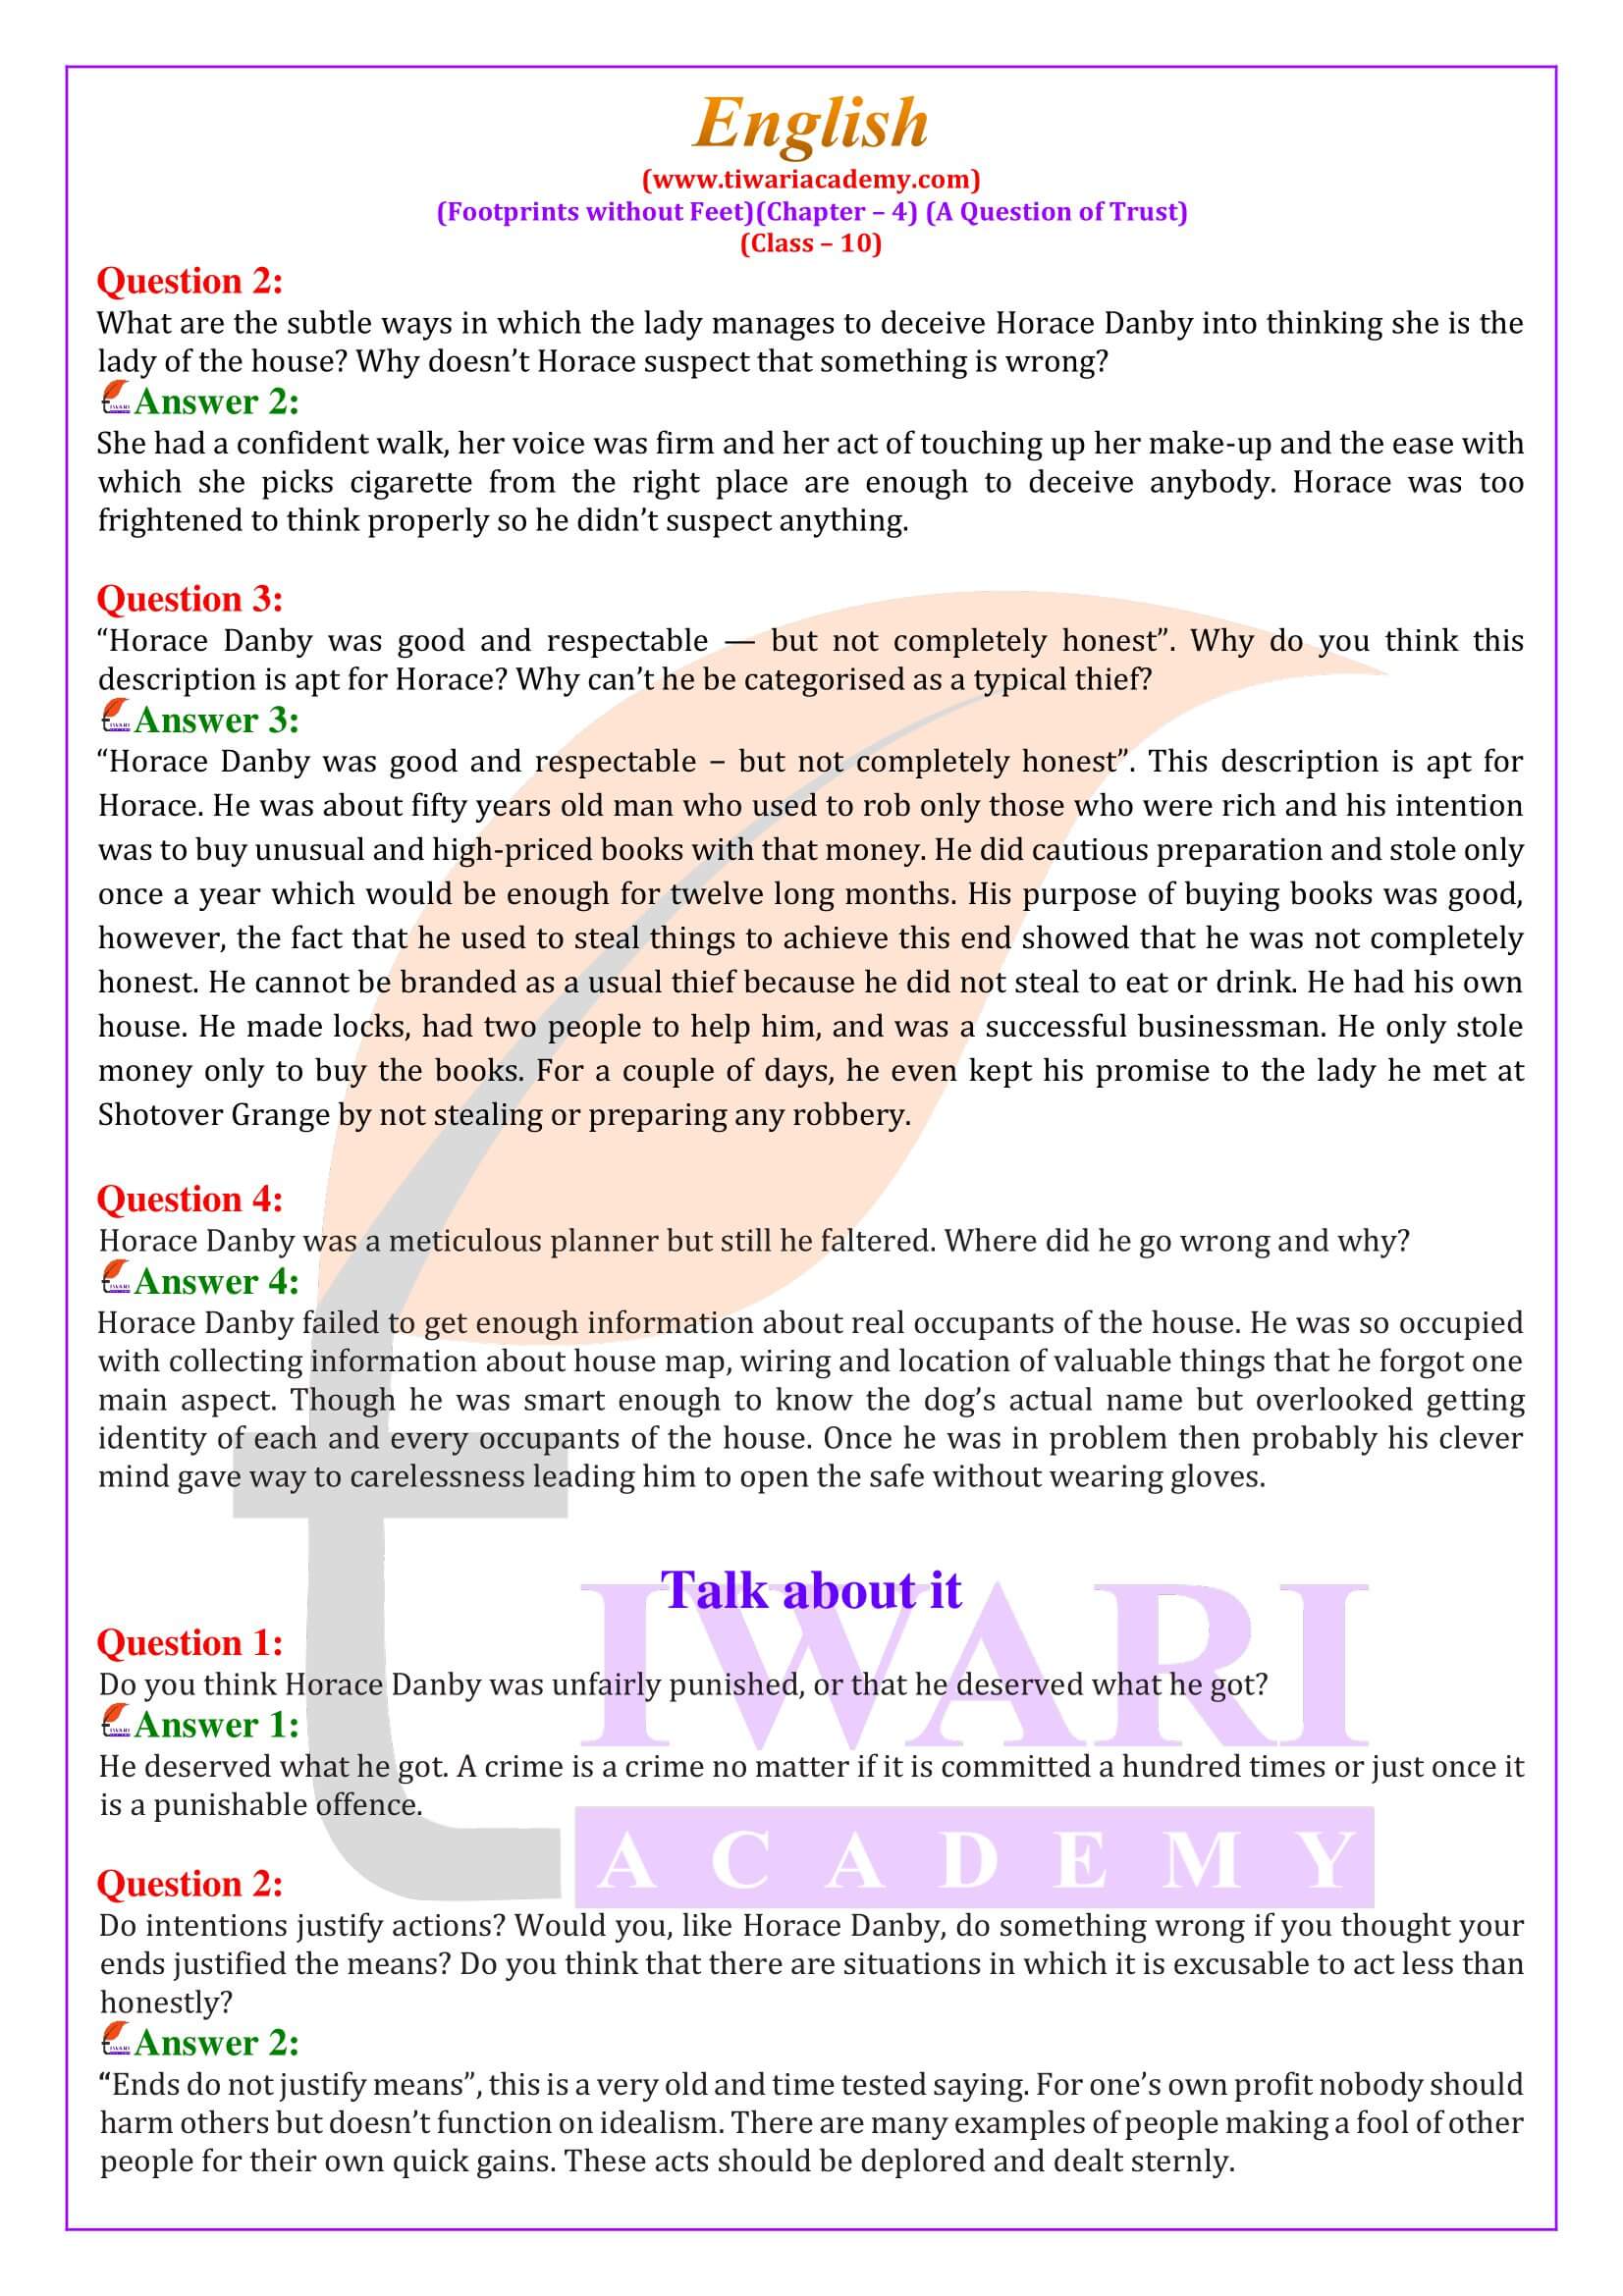 NCERT Solutions for Class 10 English Chapter 4 A Question of Trust